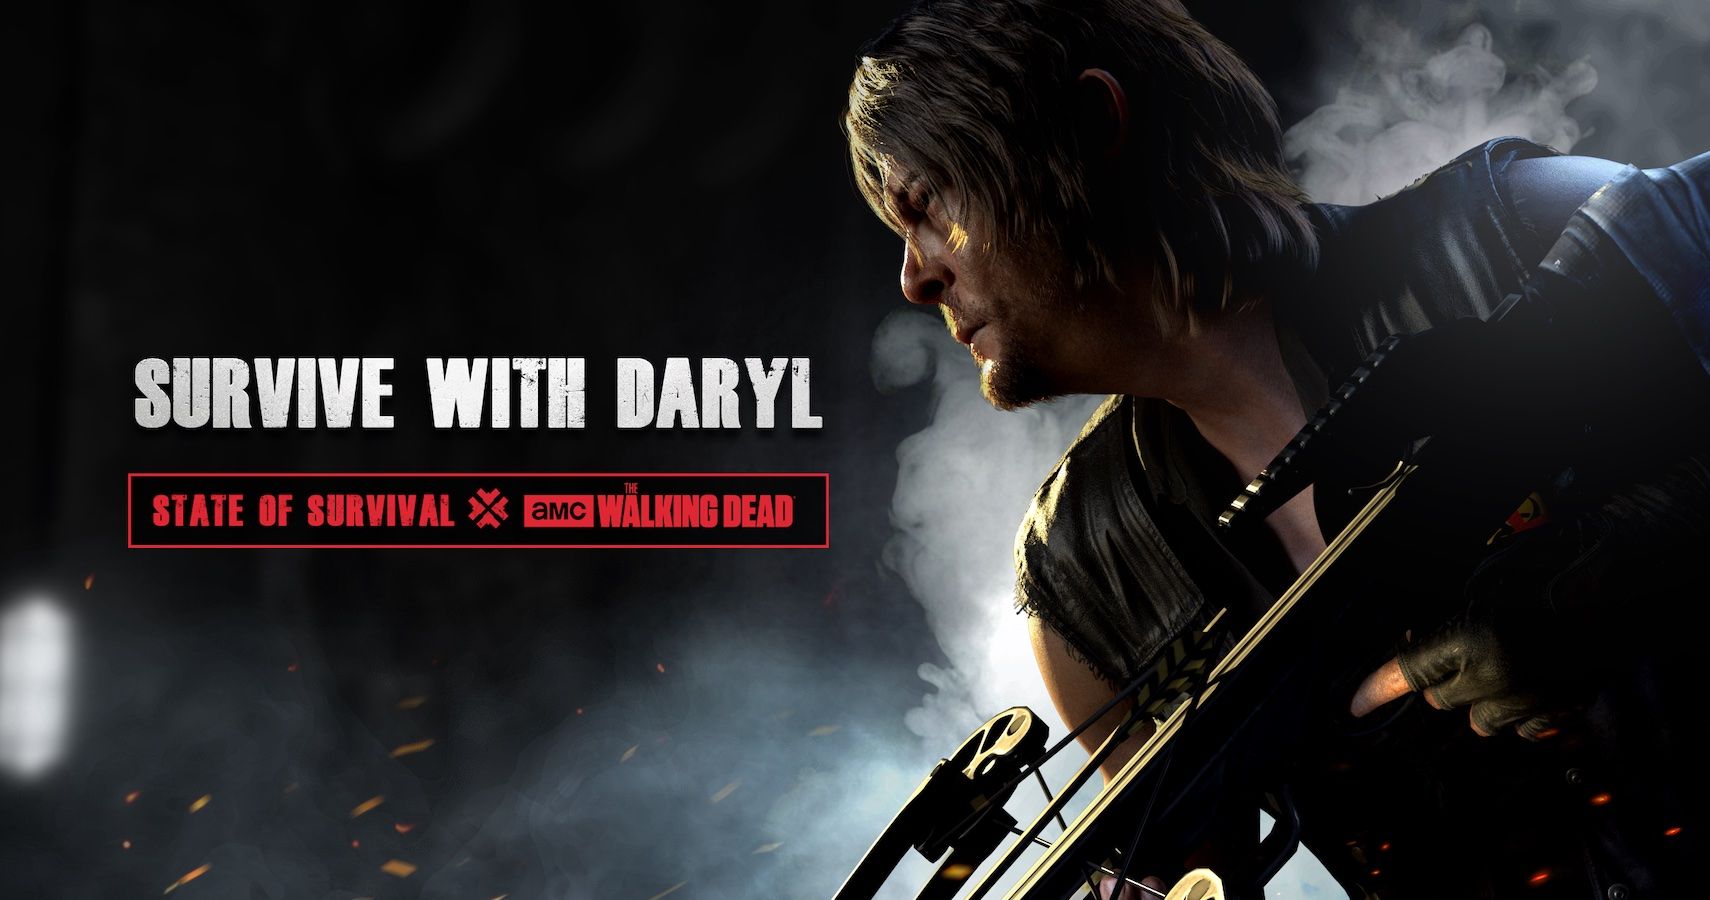 State of Survival Daryl Dixon